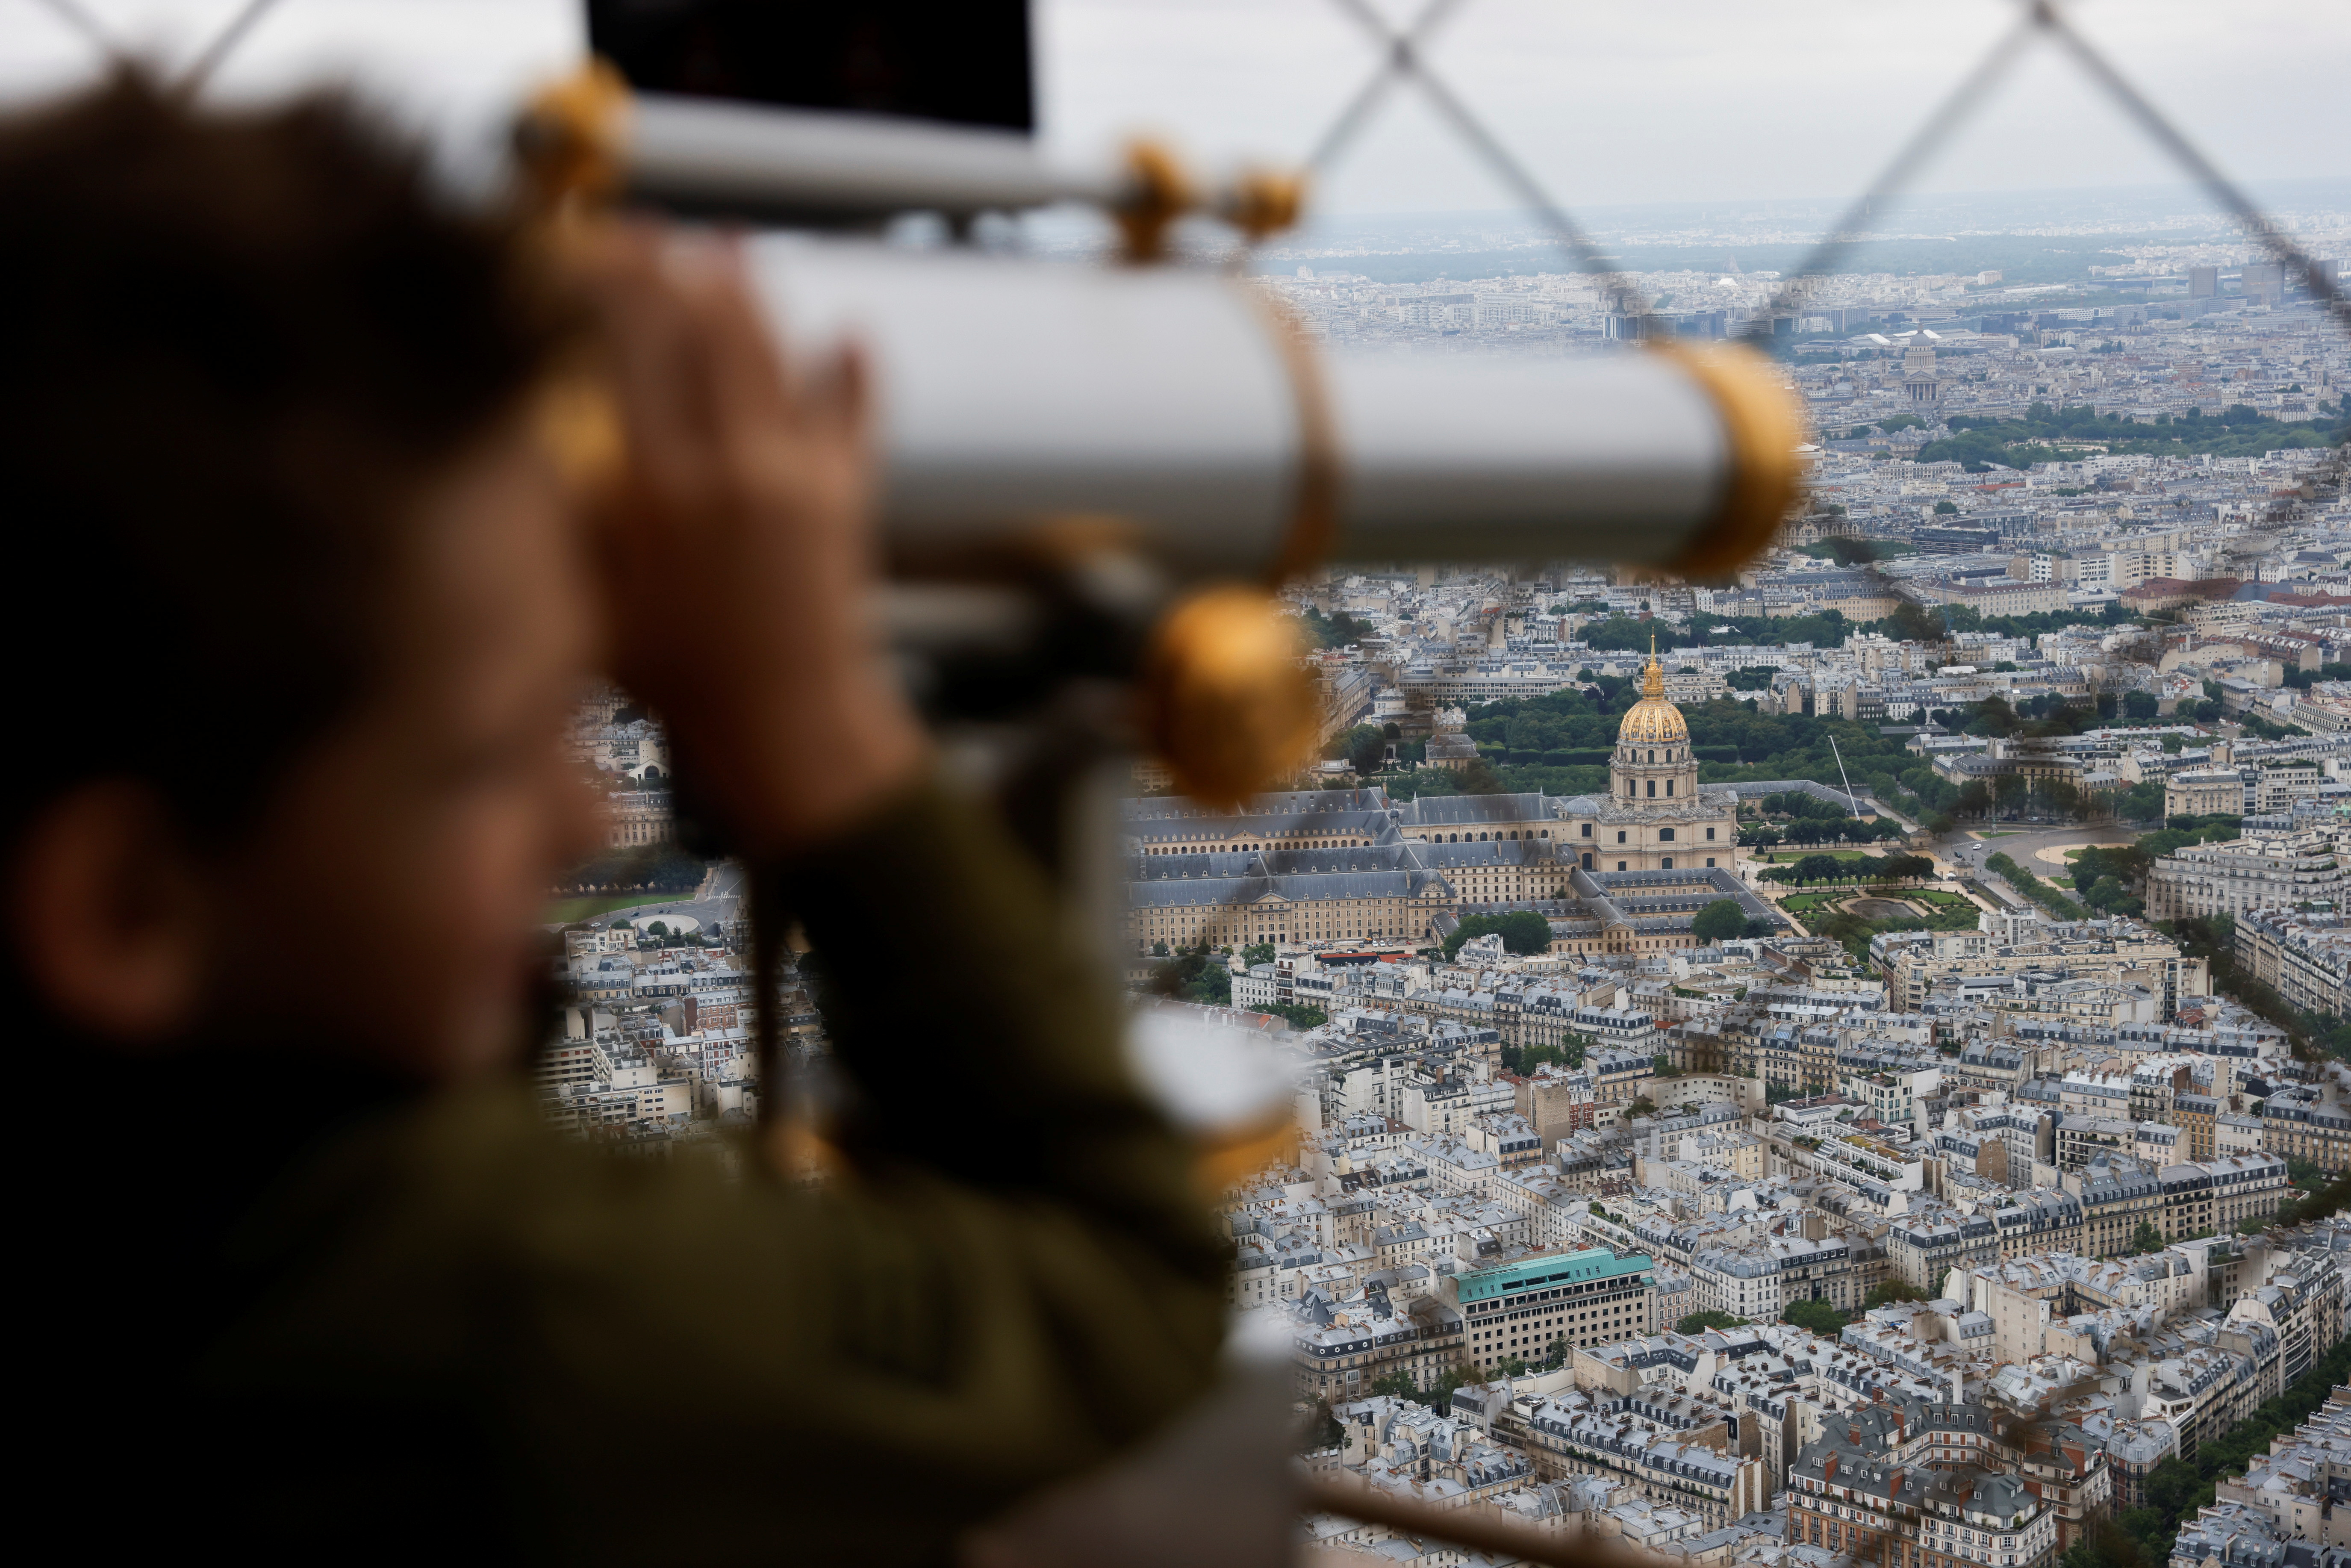 Paris' iconic Eiffel Tower reopens its doors to tourists